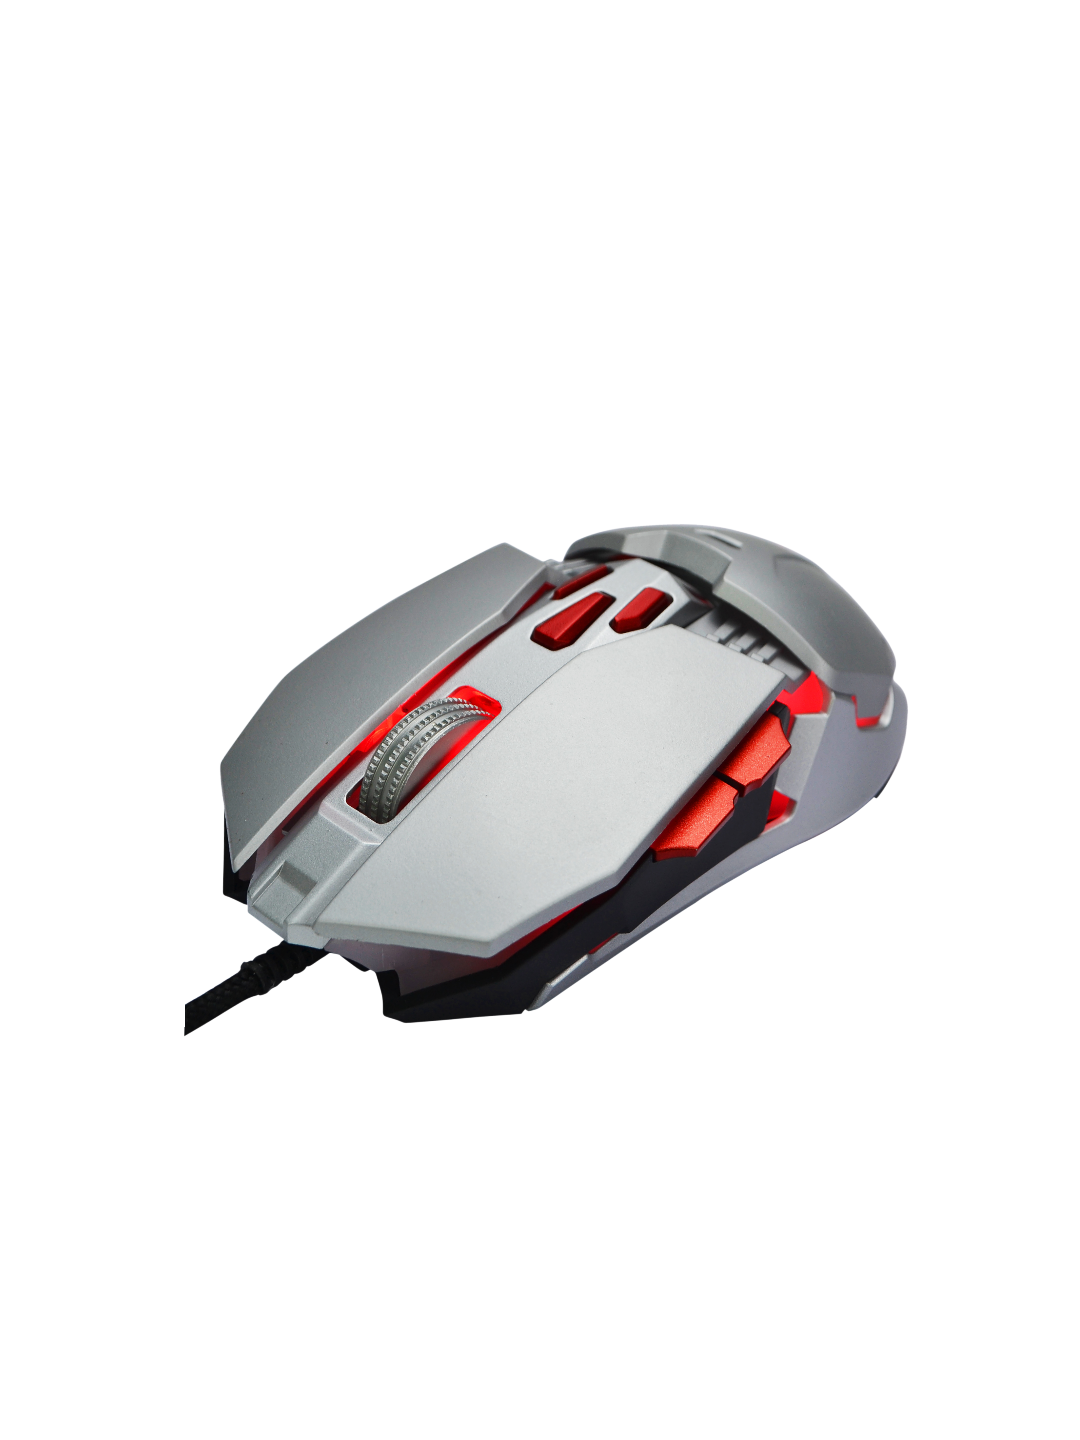 Foxin FGM-602 Wired Optical Gaming Mouse